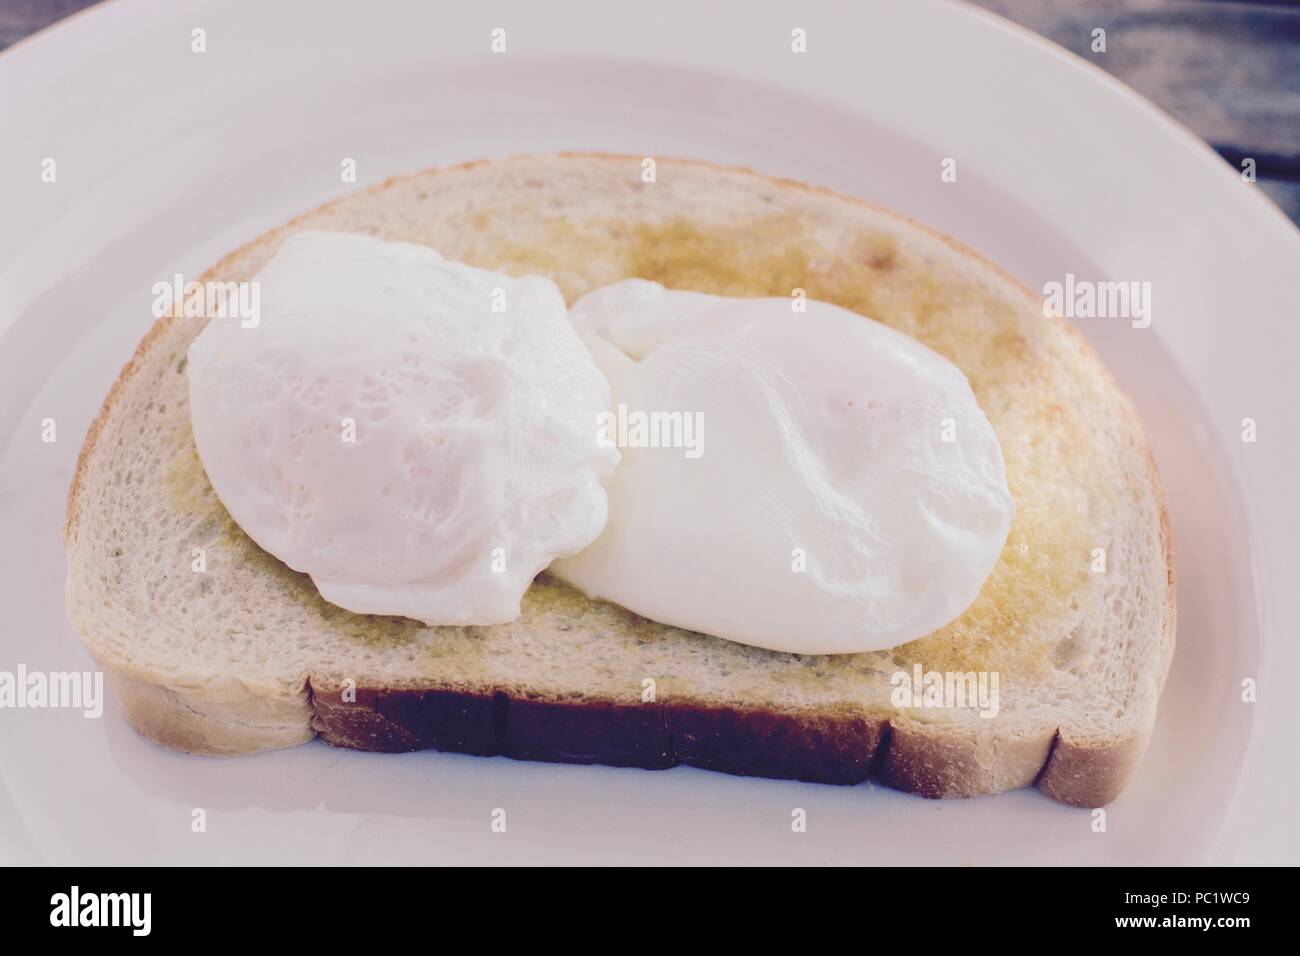 Poached eggs served on white toast Stock Photo